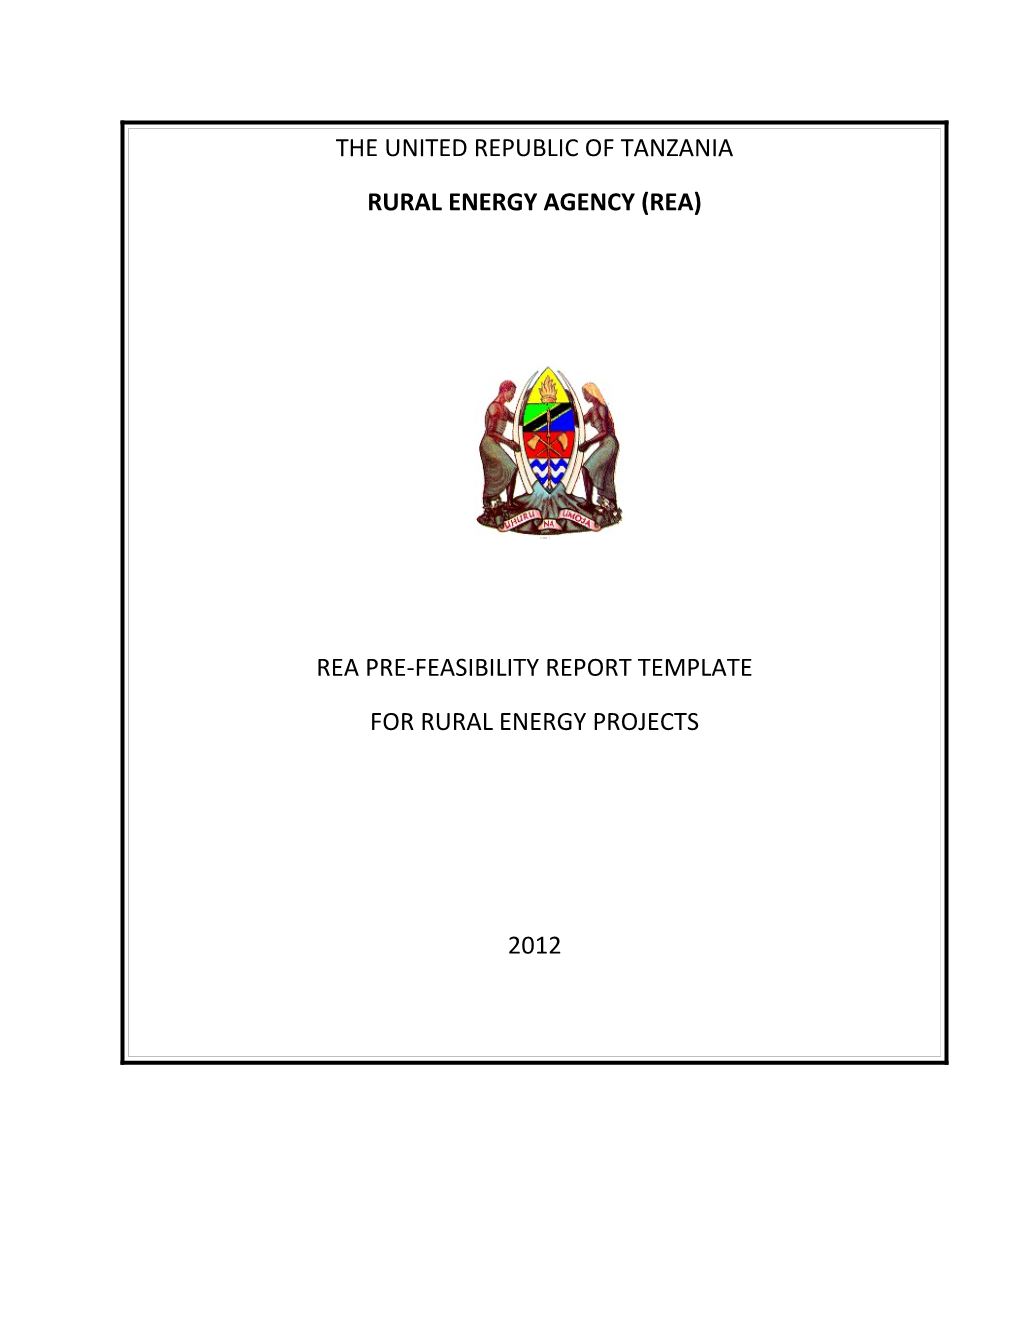 REA Pre-Feasibility Report Template for Rural Energy Projects